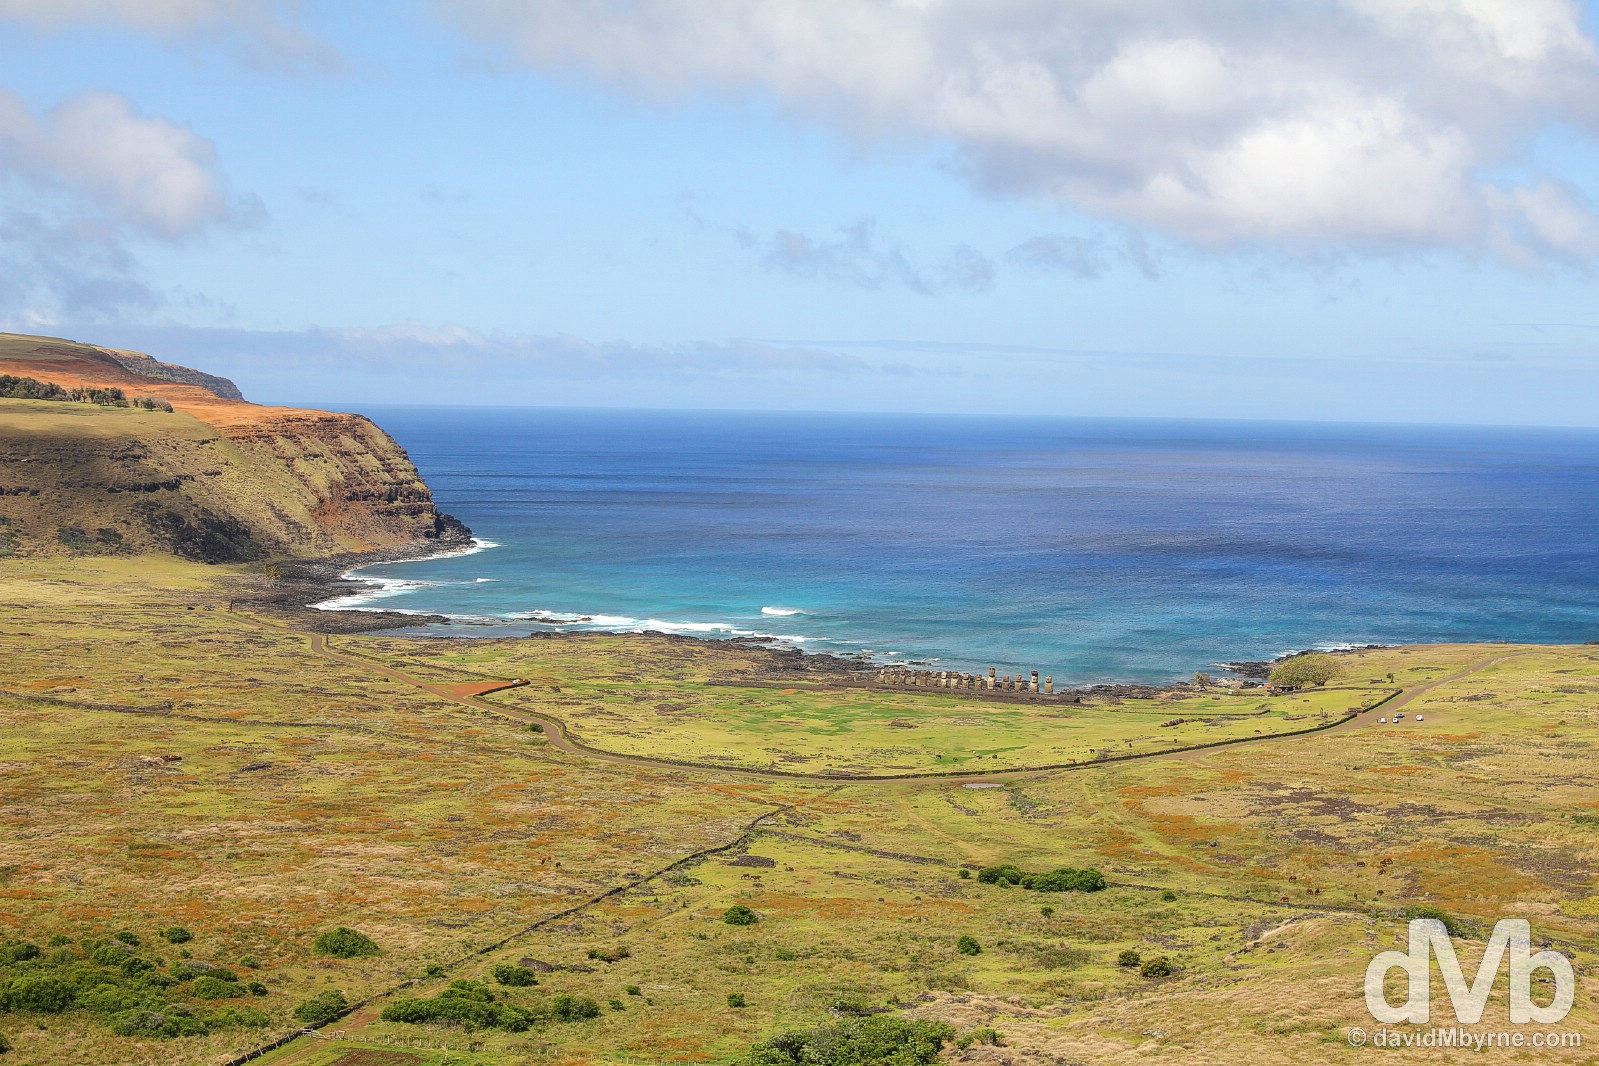 The view from the ridge of Rano Raraku crater on Easter Island, Chile. October 1, 2015.